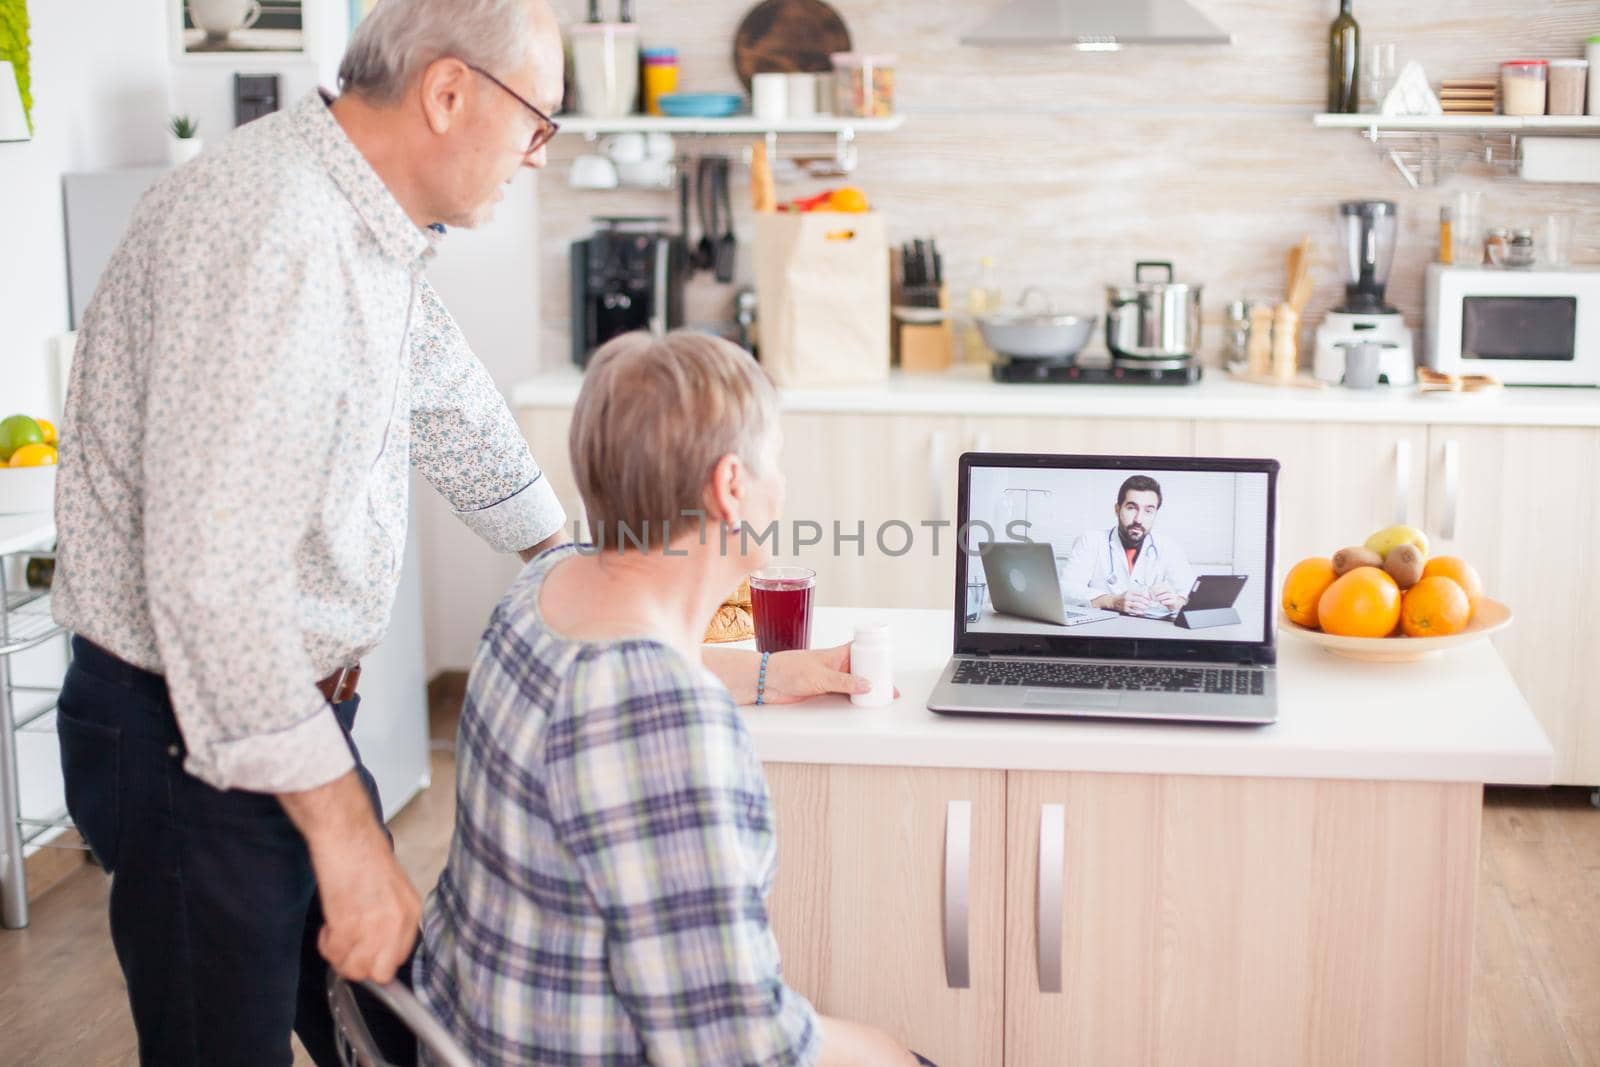 Doctor on telemedicine for senior couple. Video conference with doctor using laptop in kitchen. Online health consultation for elderly people drugs ilness advice on symptoms, physician telemedicine webcam. Medical care internet chat.